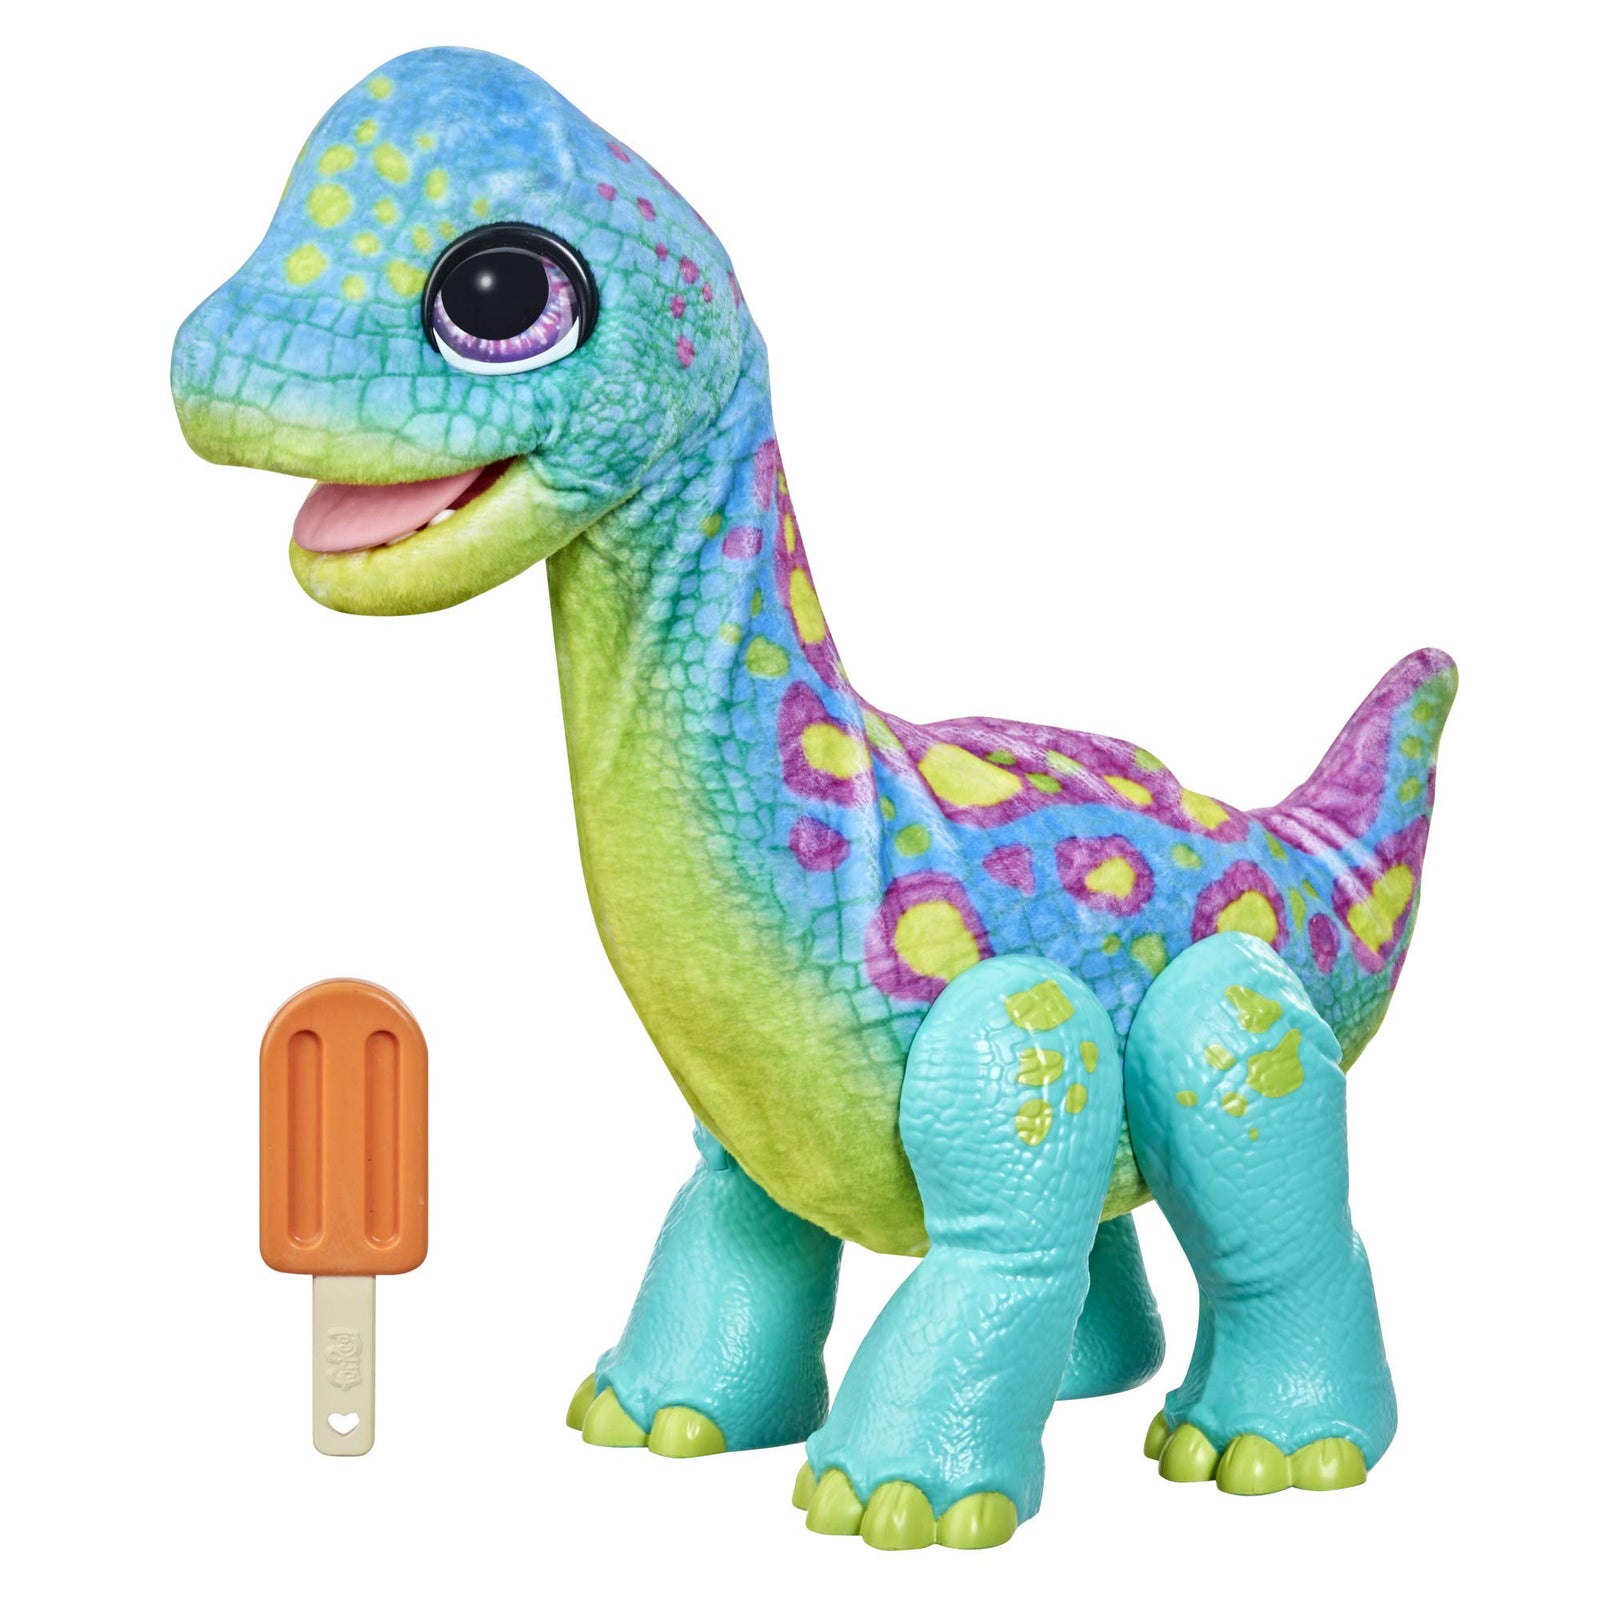 FurReal Snackin’ Sam The Bronto Interactive Animatronic Plush Toy, 40+ Sounds and Reactions, Ages 4 and up